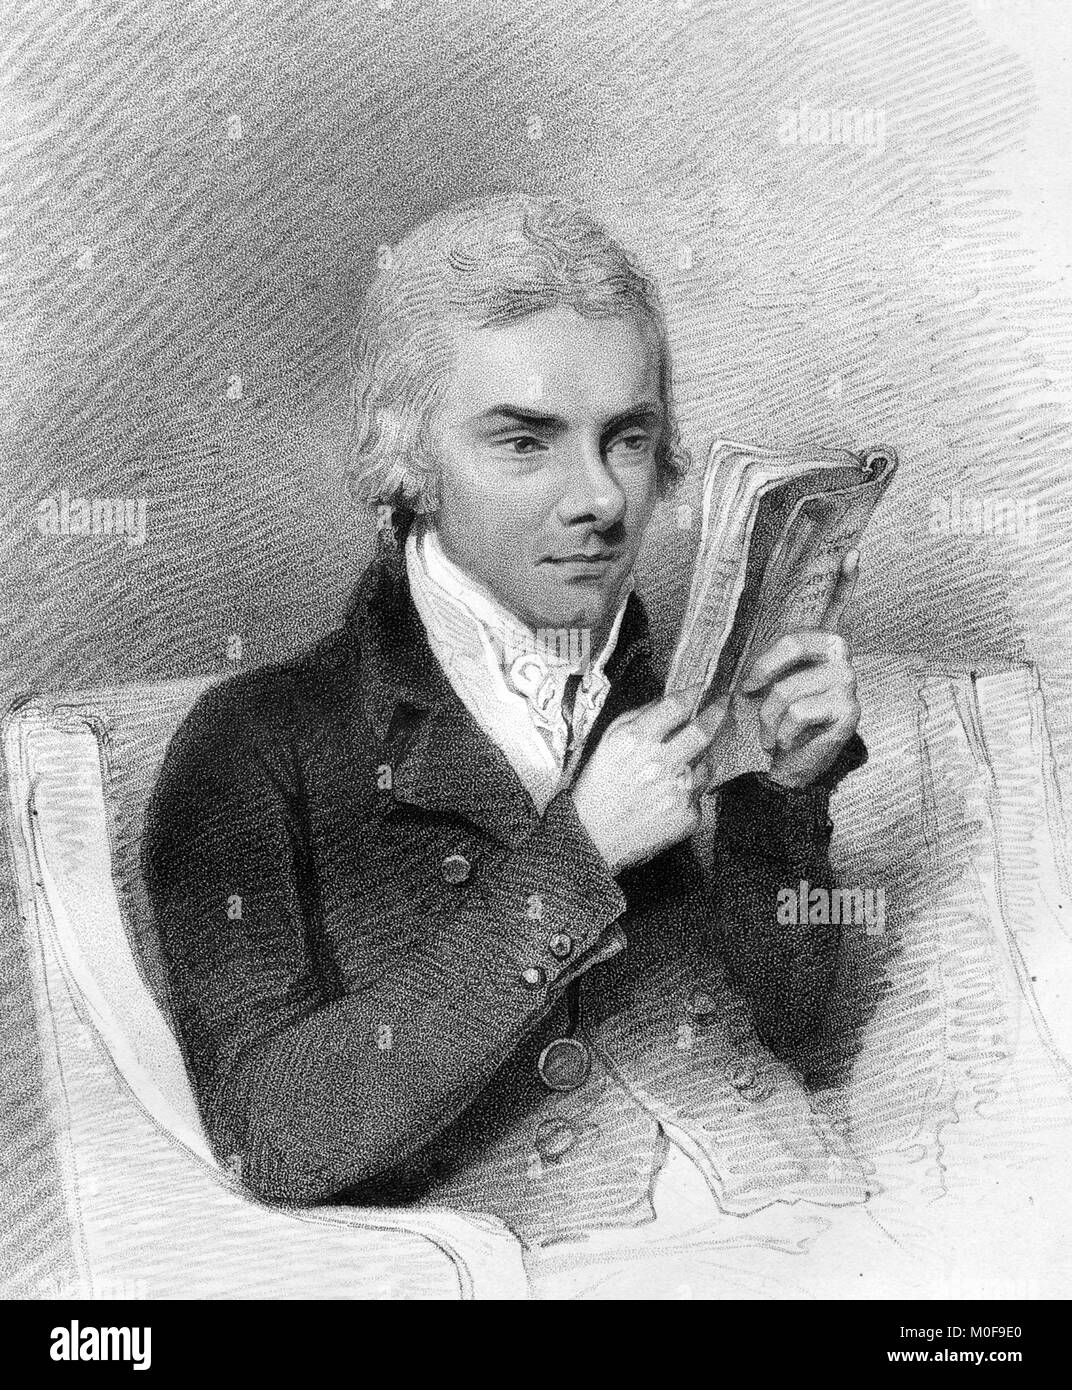 William Wilberforce (1759â€“1833), an English politician, philanthropist, and a leader of the movement to abolish the slave trade. An 1809 engraving by Giovanni Vendramini from a drawing by Henry Edridge. Stock Photo